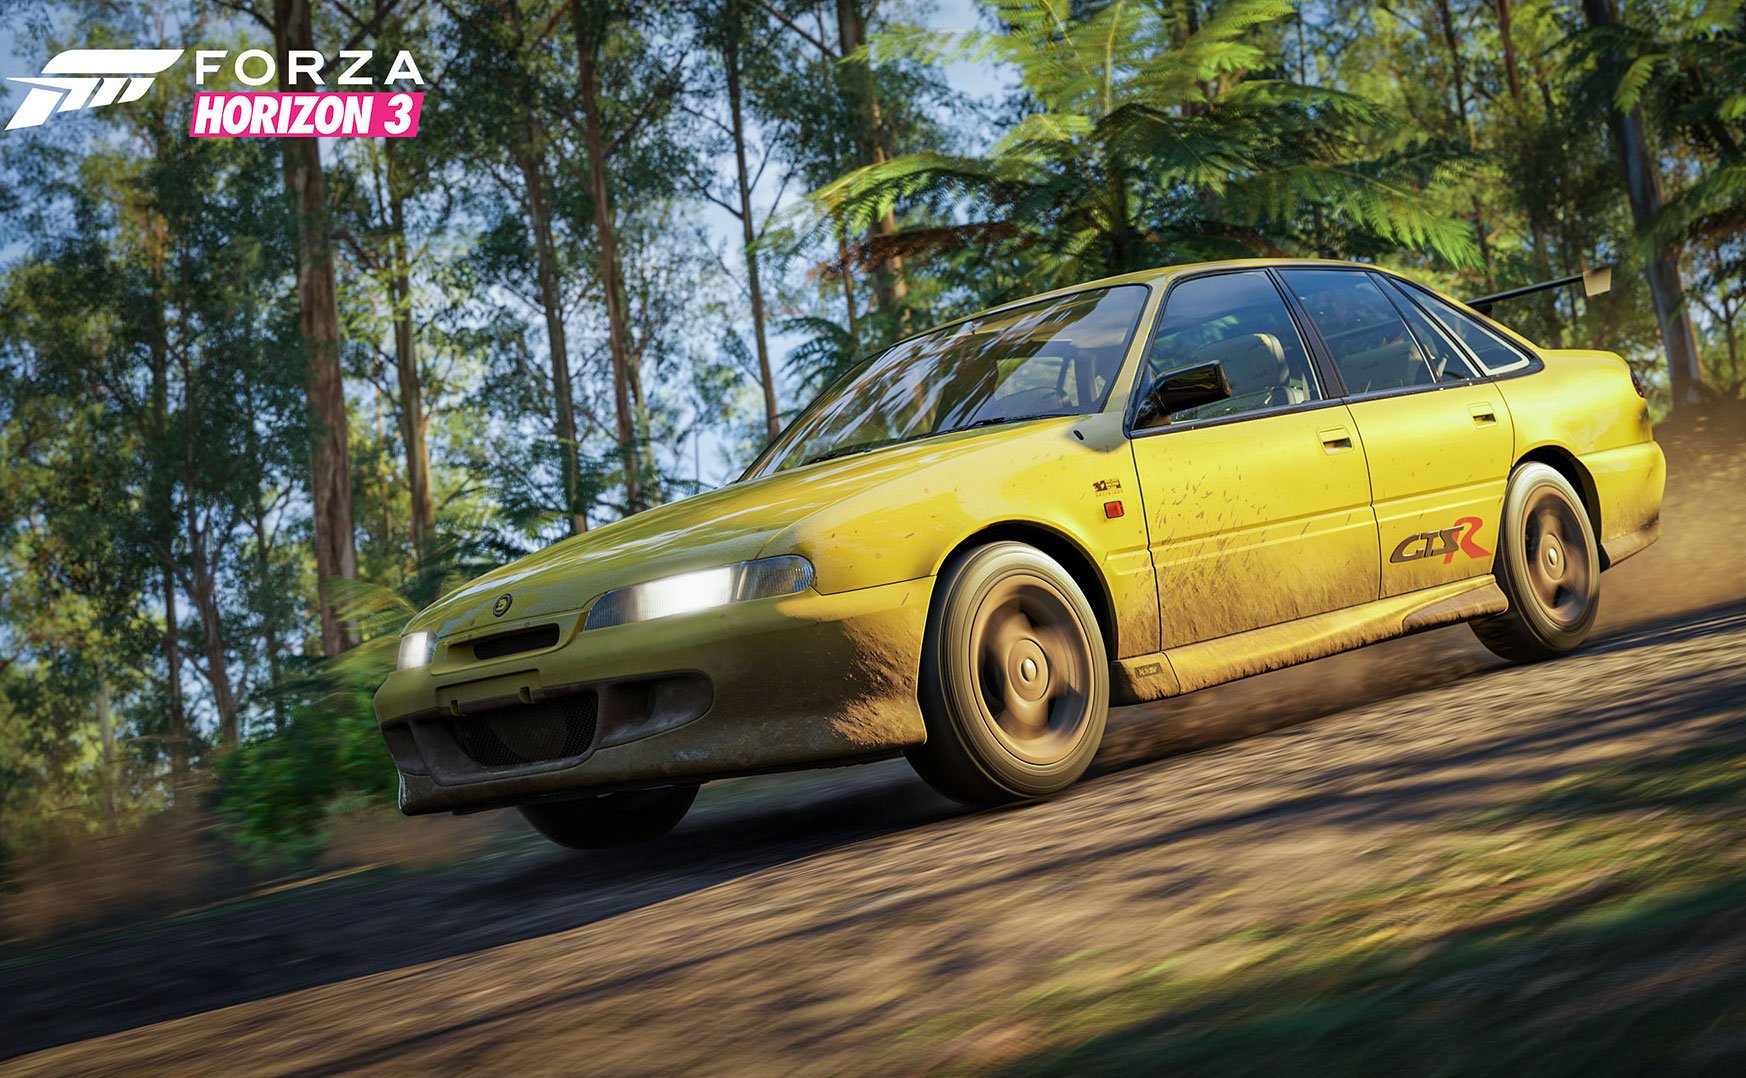 Forza Horizon 3 Logitech G expansion pack adds 1996 HSV GTS-R